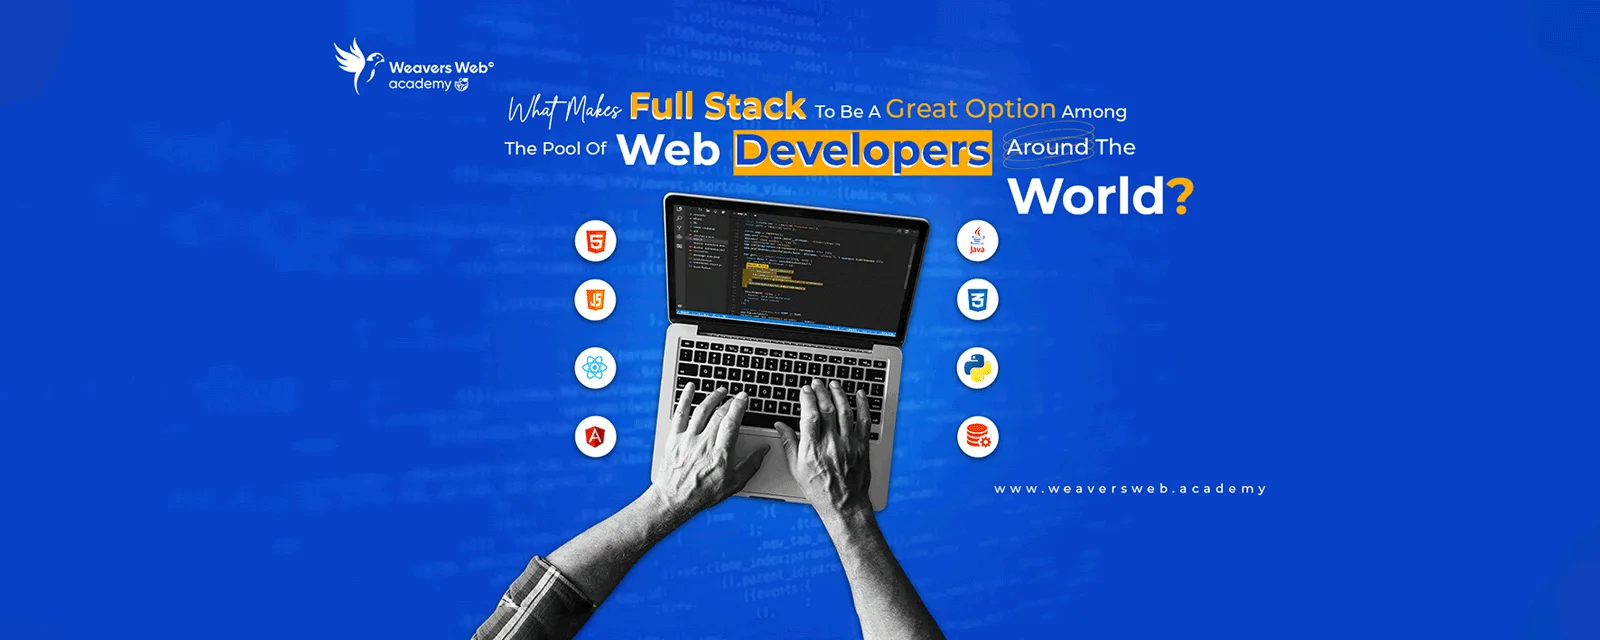 Why is full stack a top choice among global web developers?